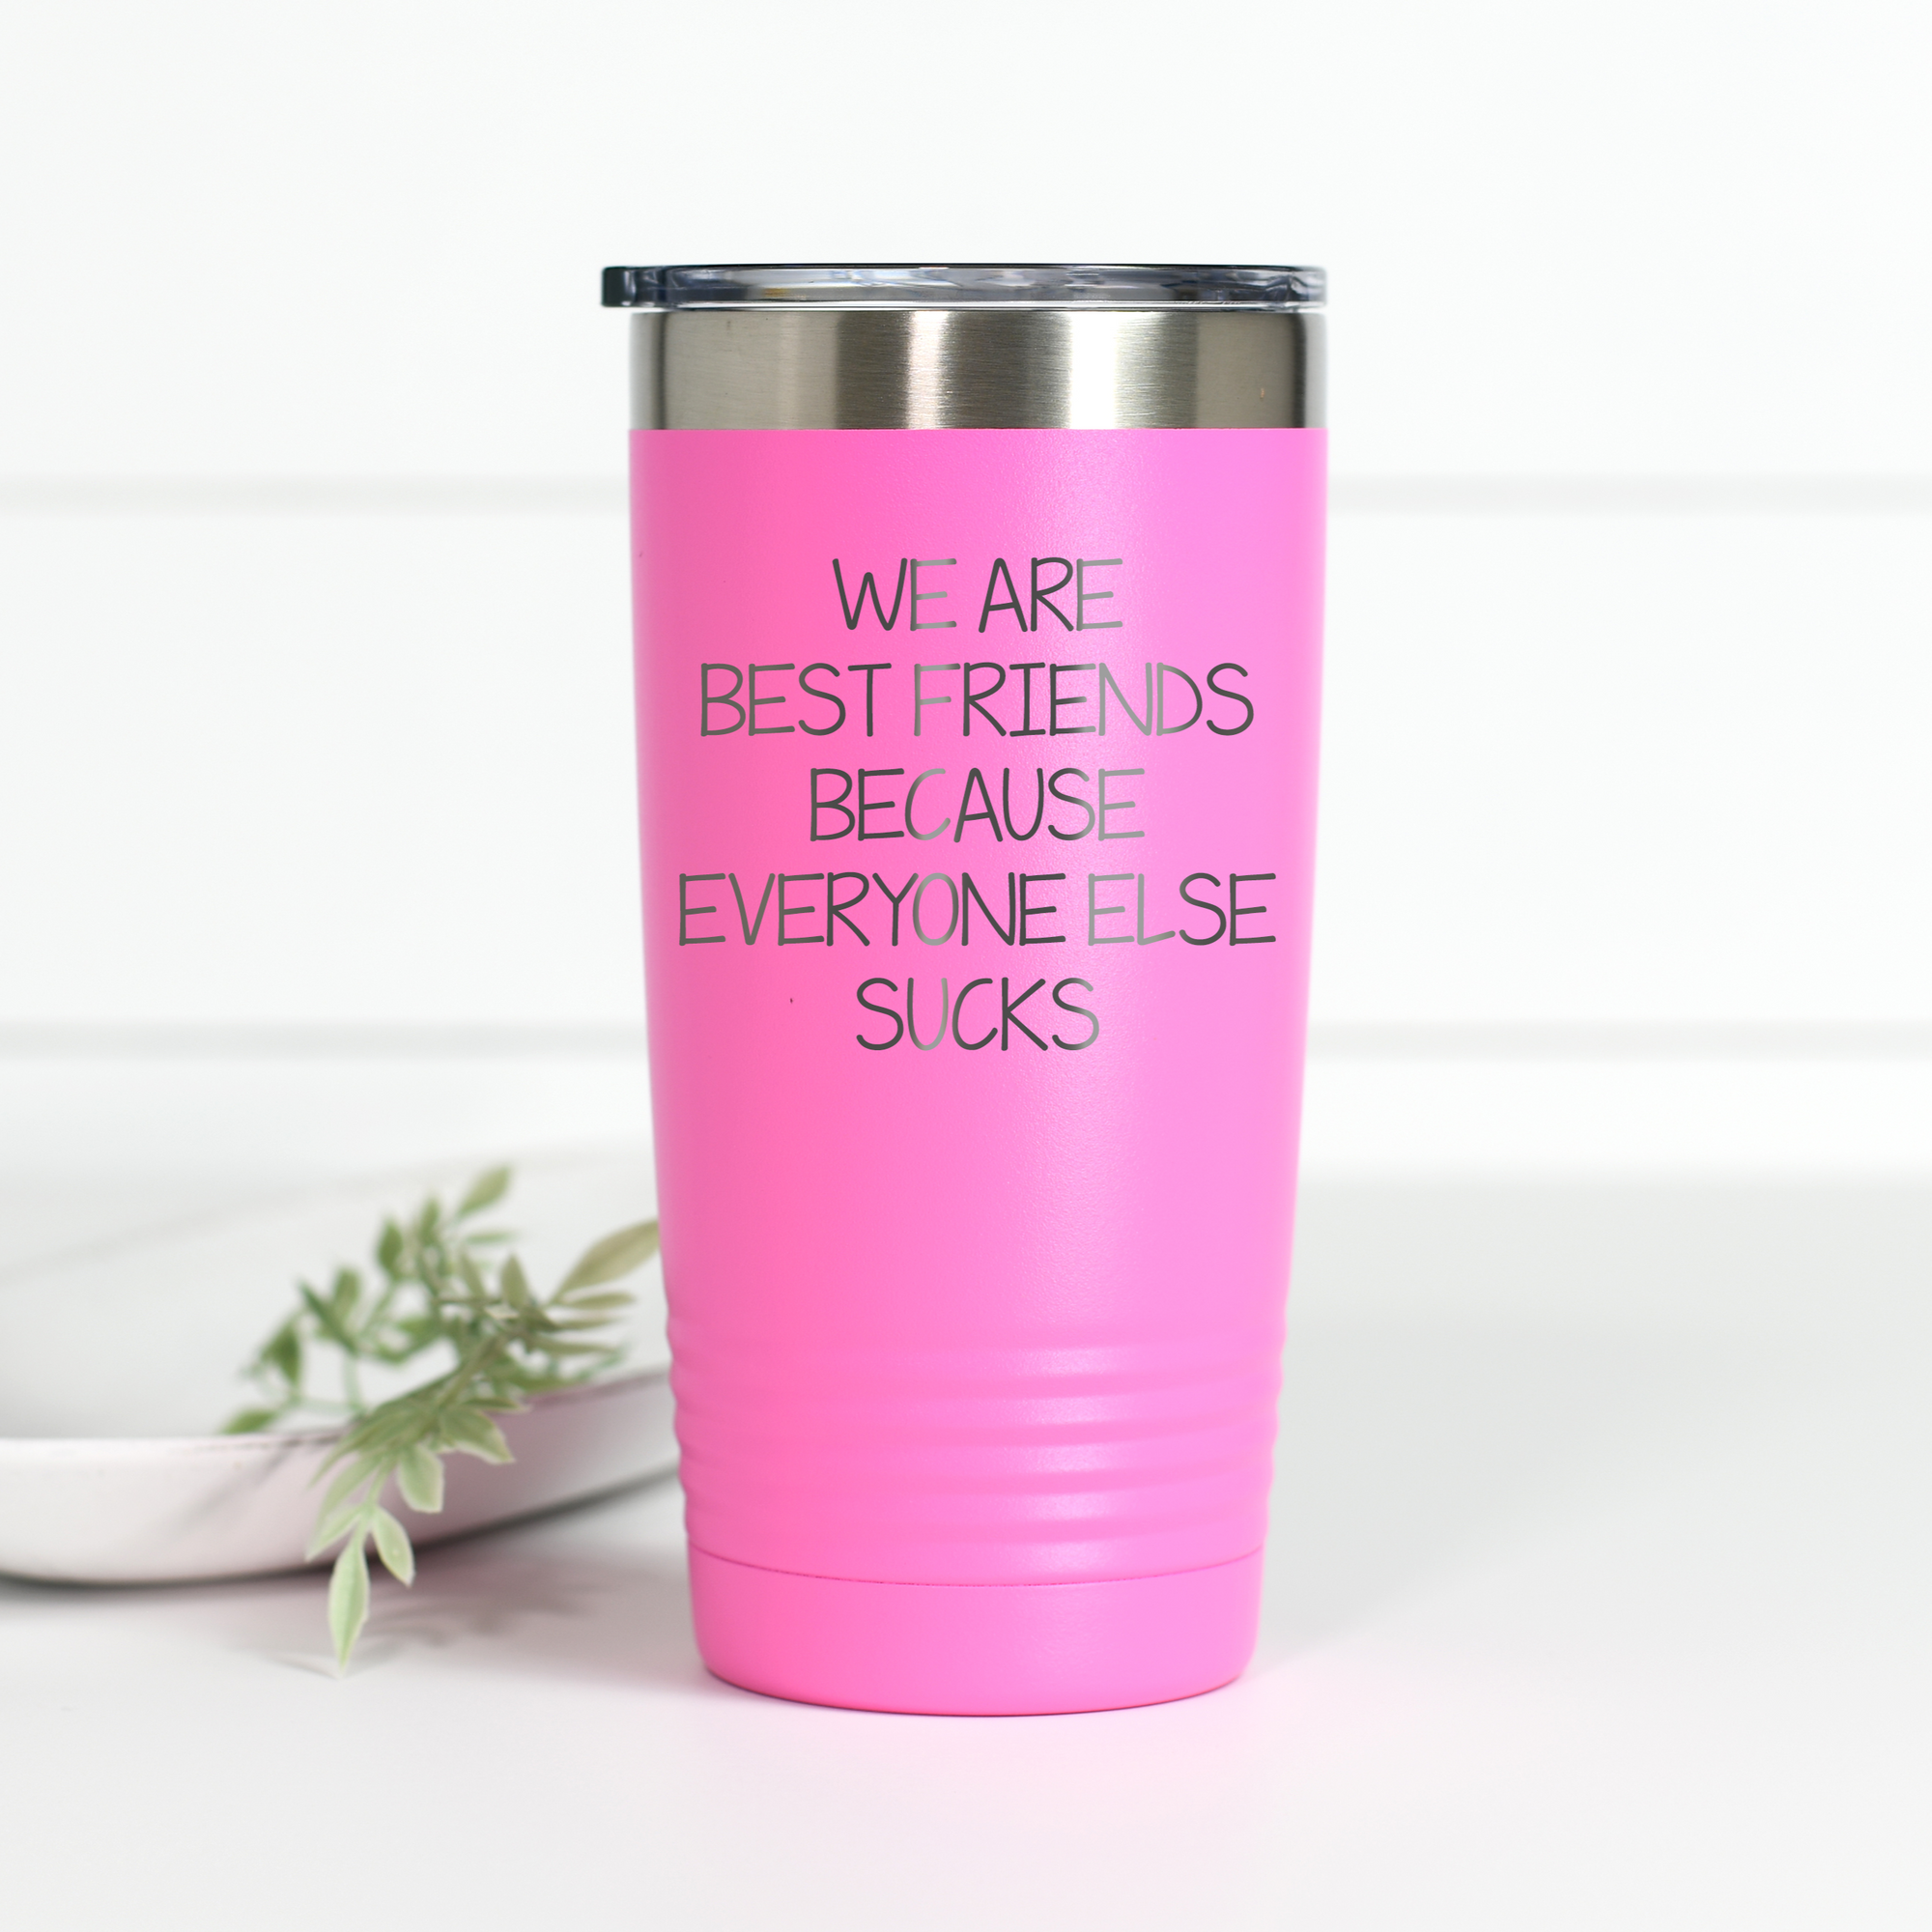 We Are Best Friends Because Everyone Else Sucks 20 oz Engraved Tumbler